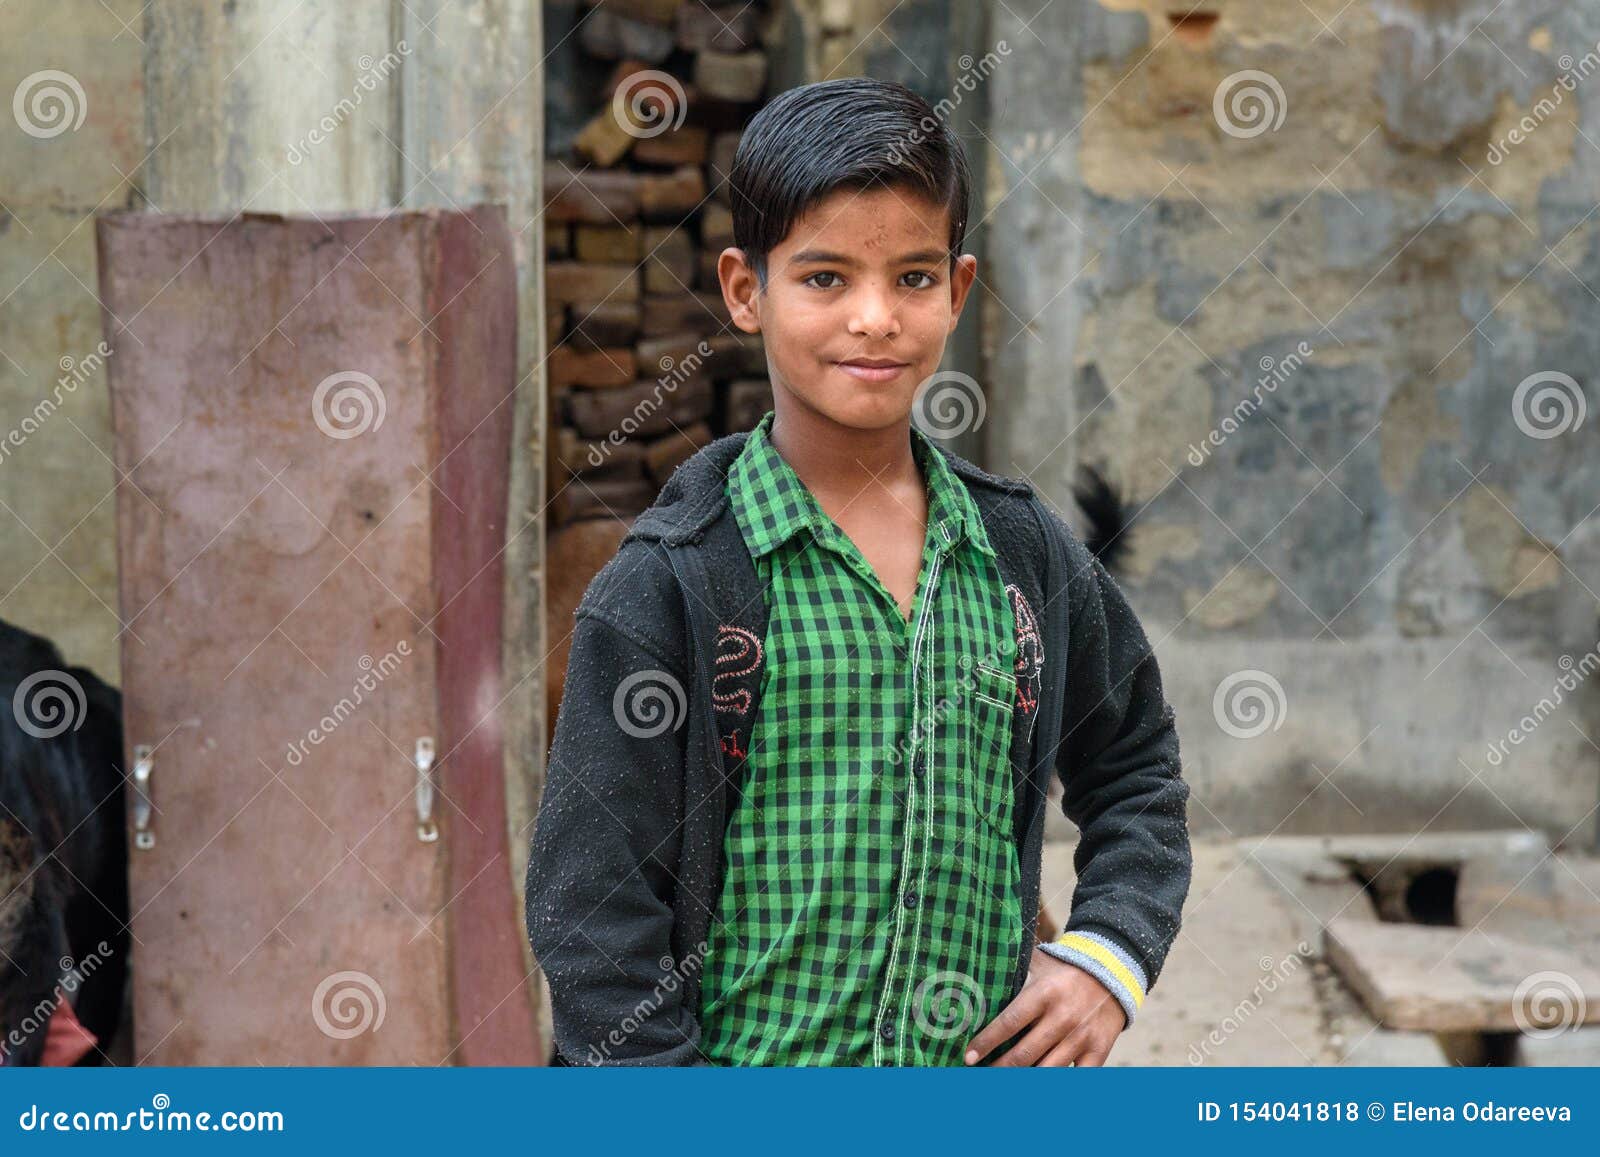 Portrait Of Indian Young Boy On The Street In Bikaner R